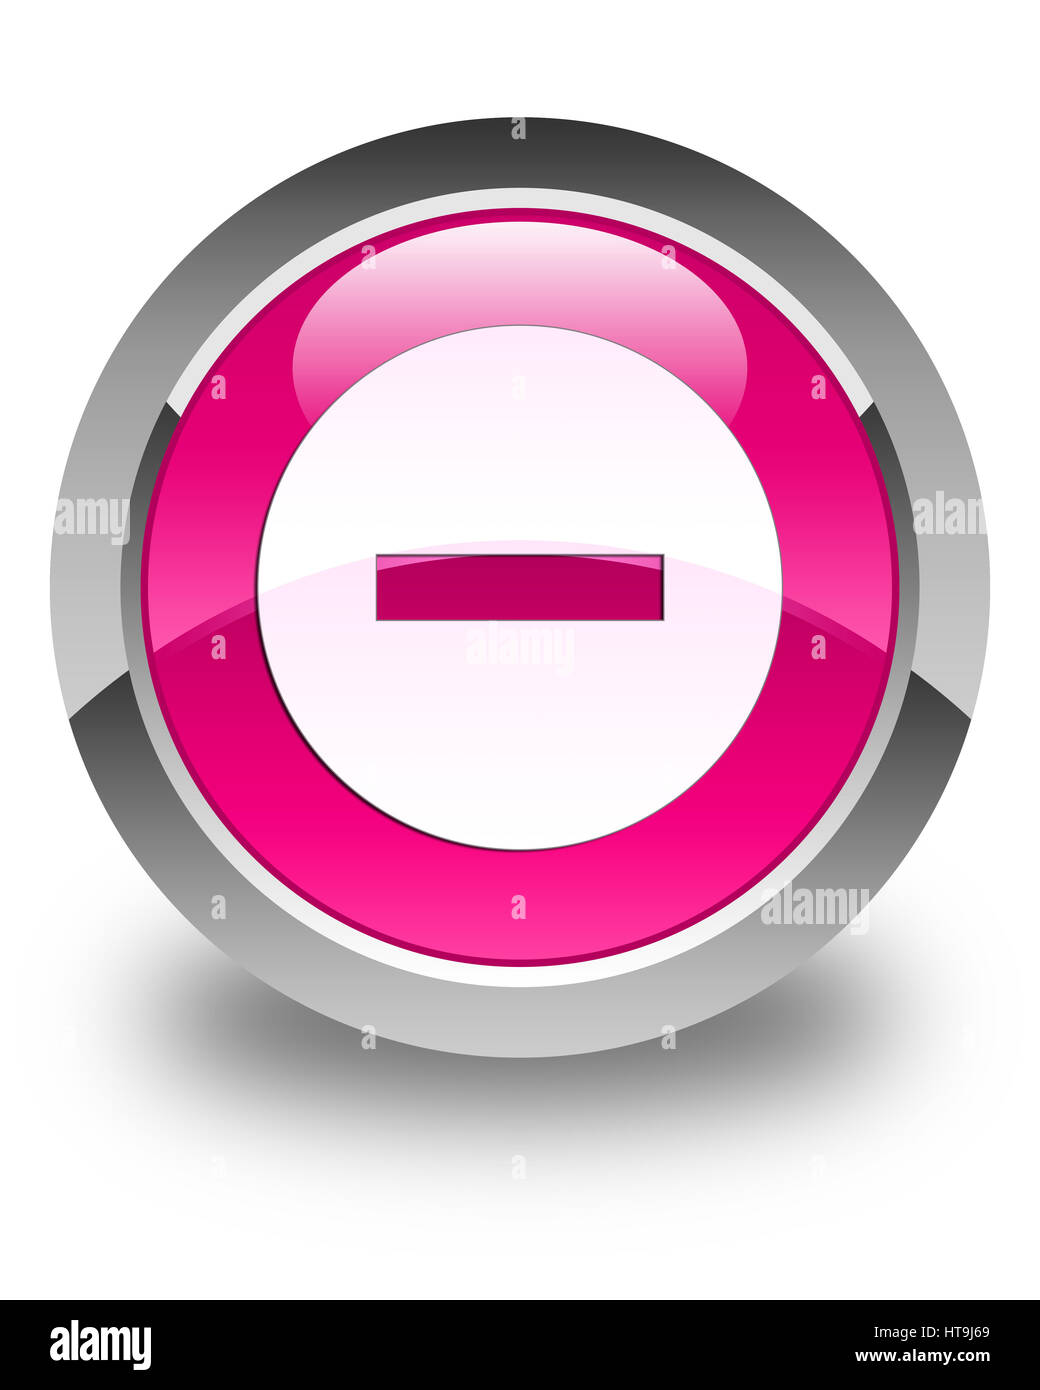 Cancel icon isolated on glossy pink round button abstract illustration Stock Photo